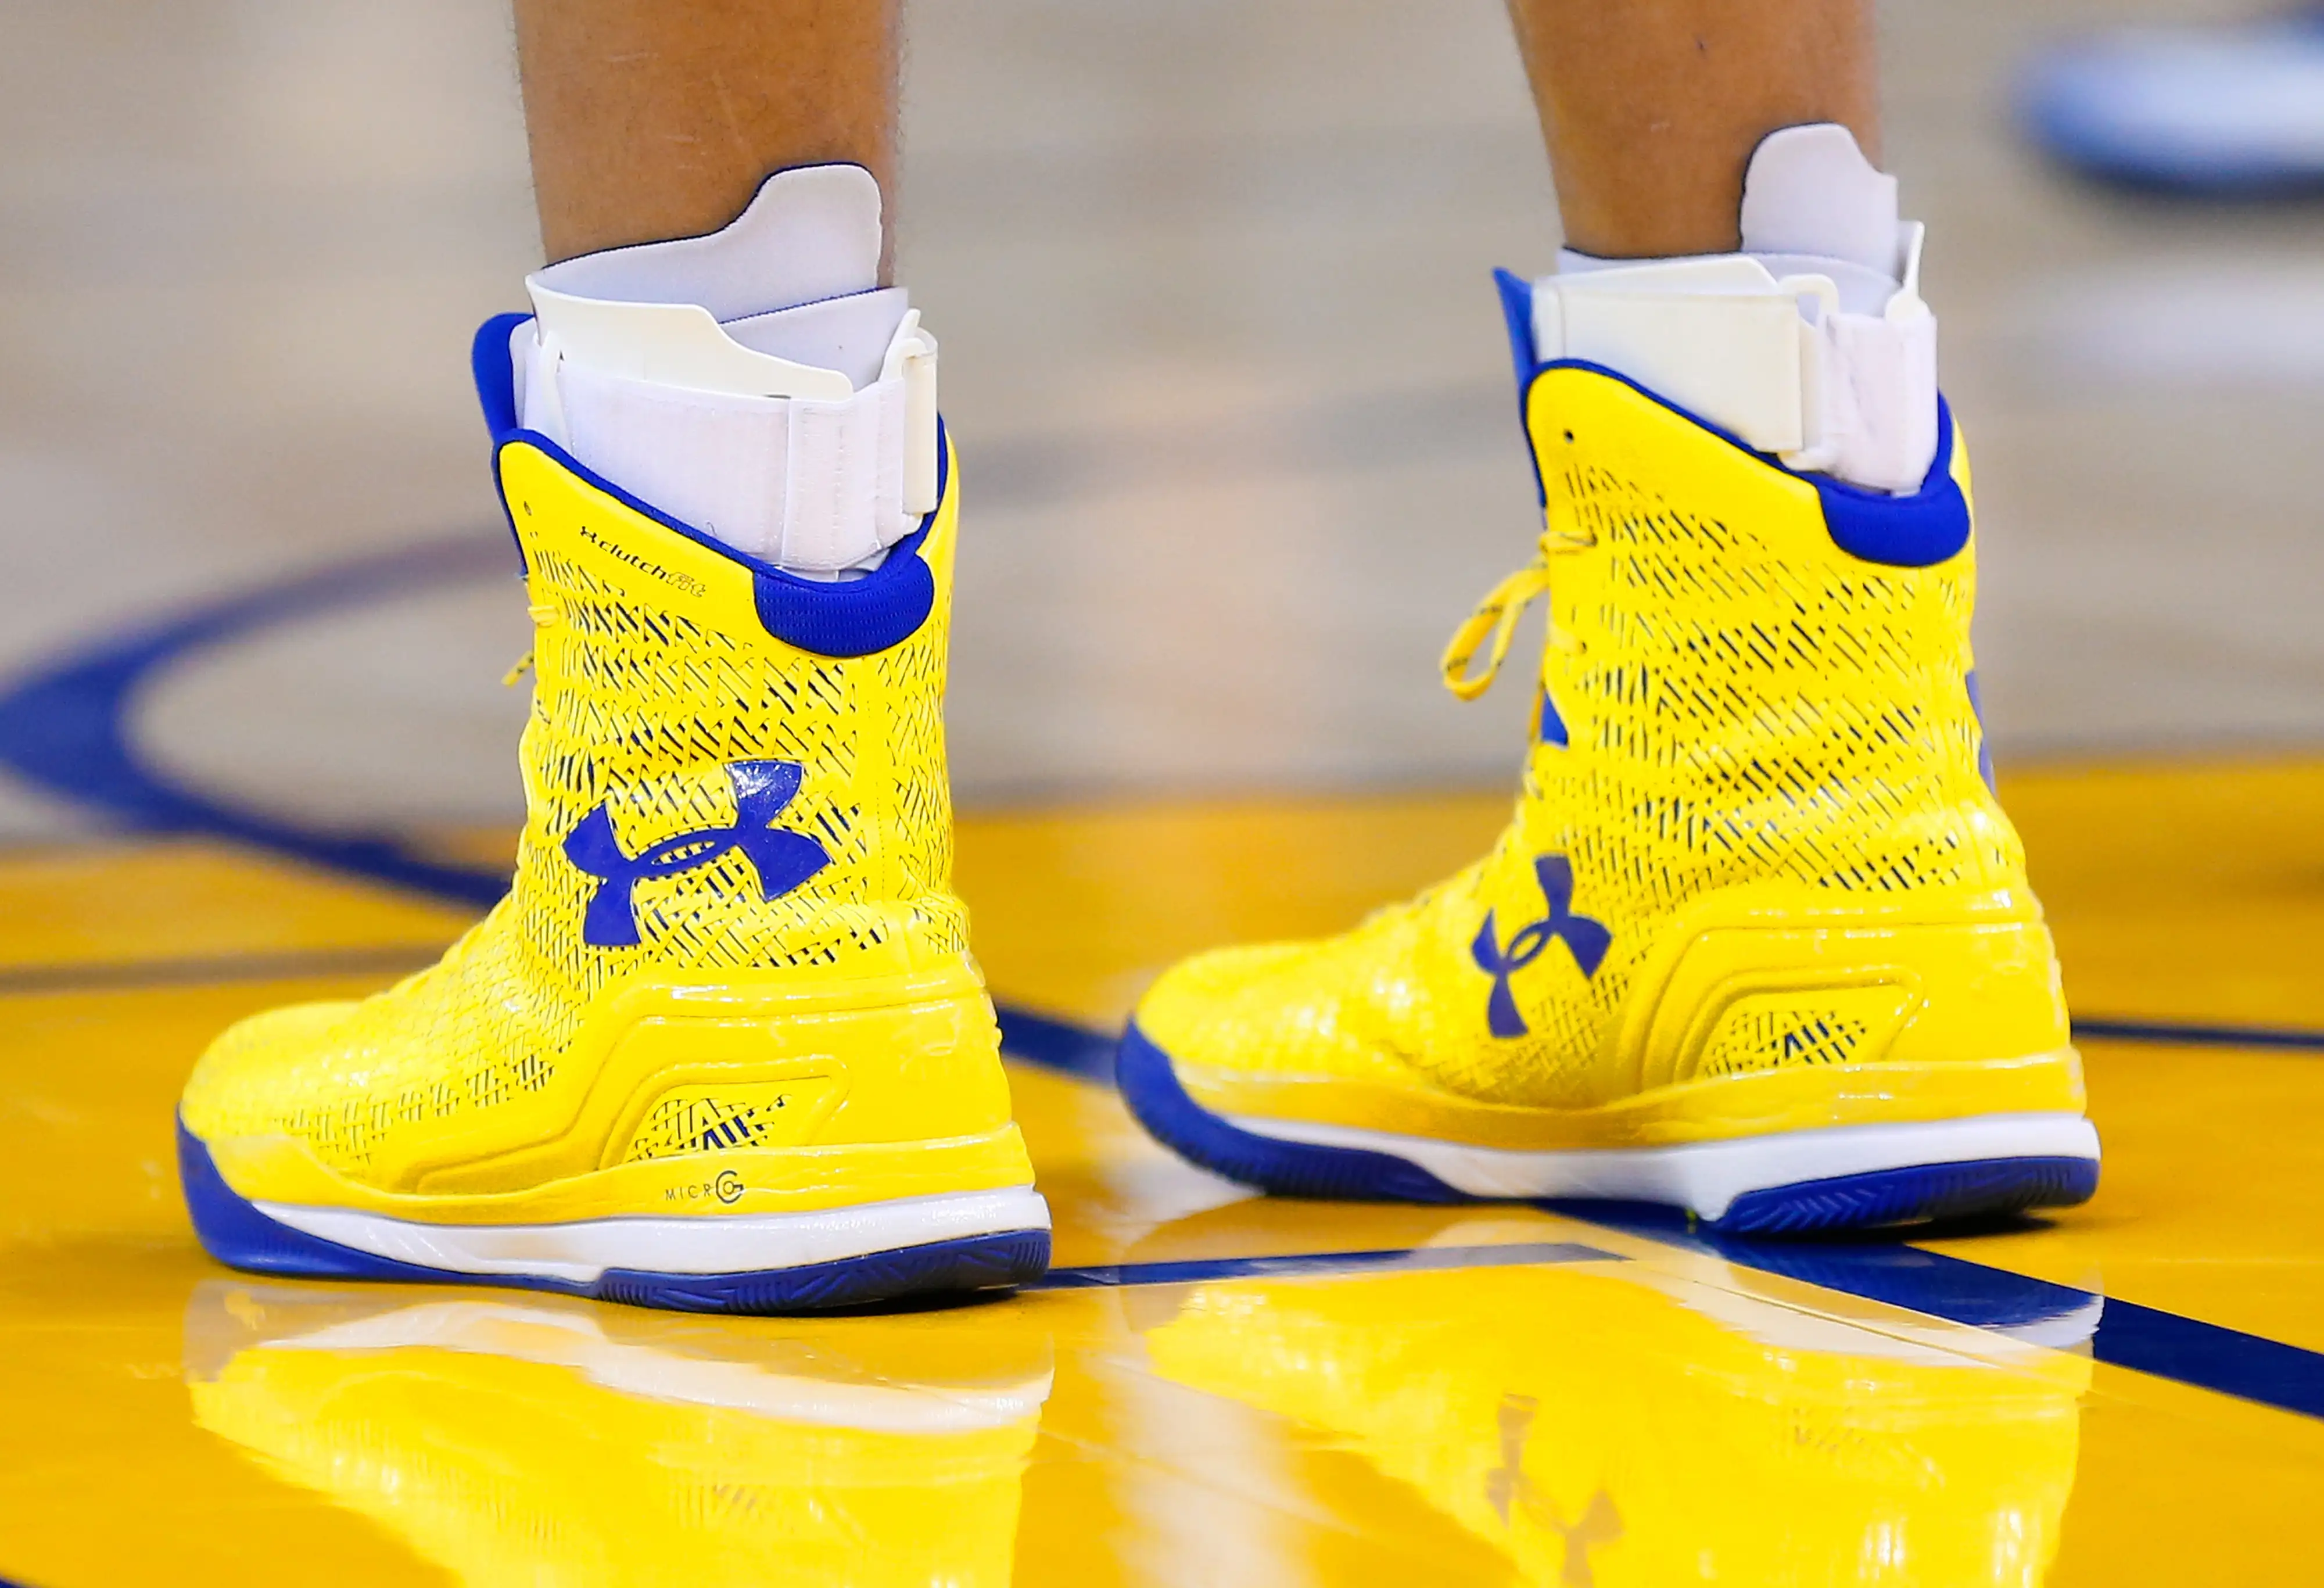 A detailed view of the Under Armour basketball shoes worn by Golden State Warriors guard Stephen Curry #30 against the Utah Jazz at ORACLE Arena on November 21, 2014 in Oakland, California.